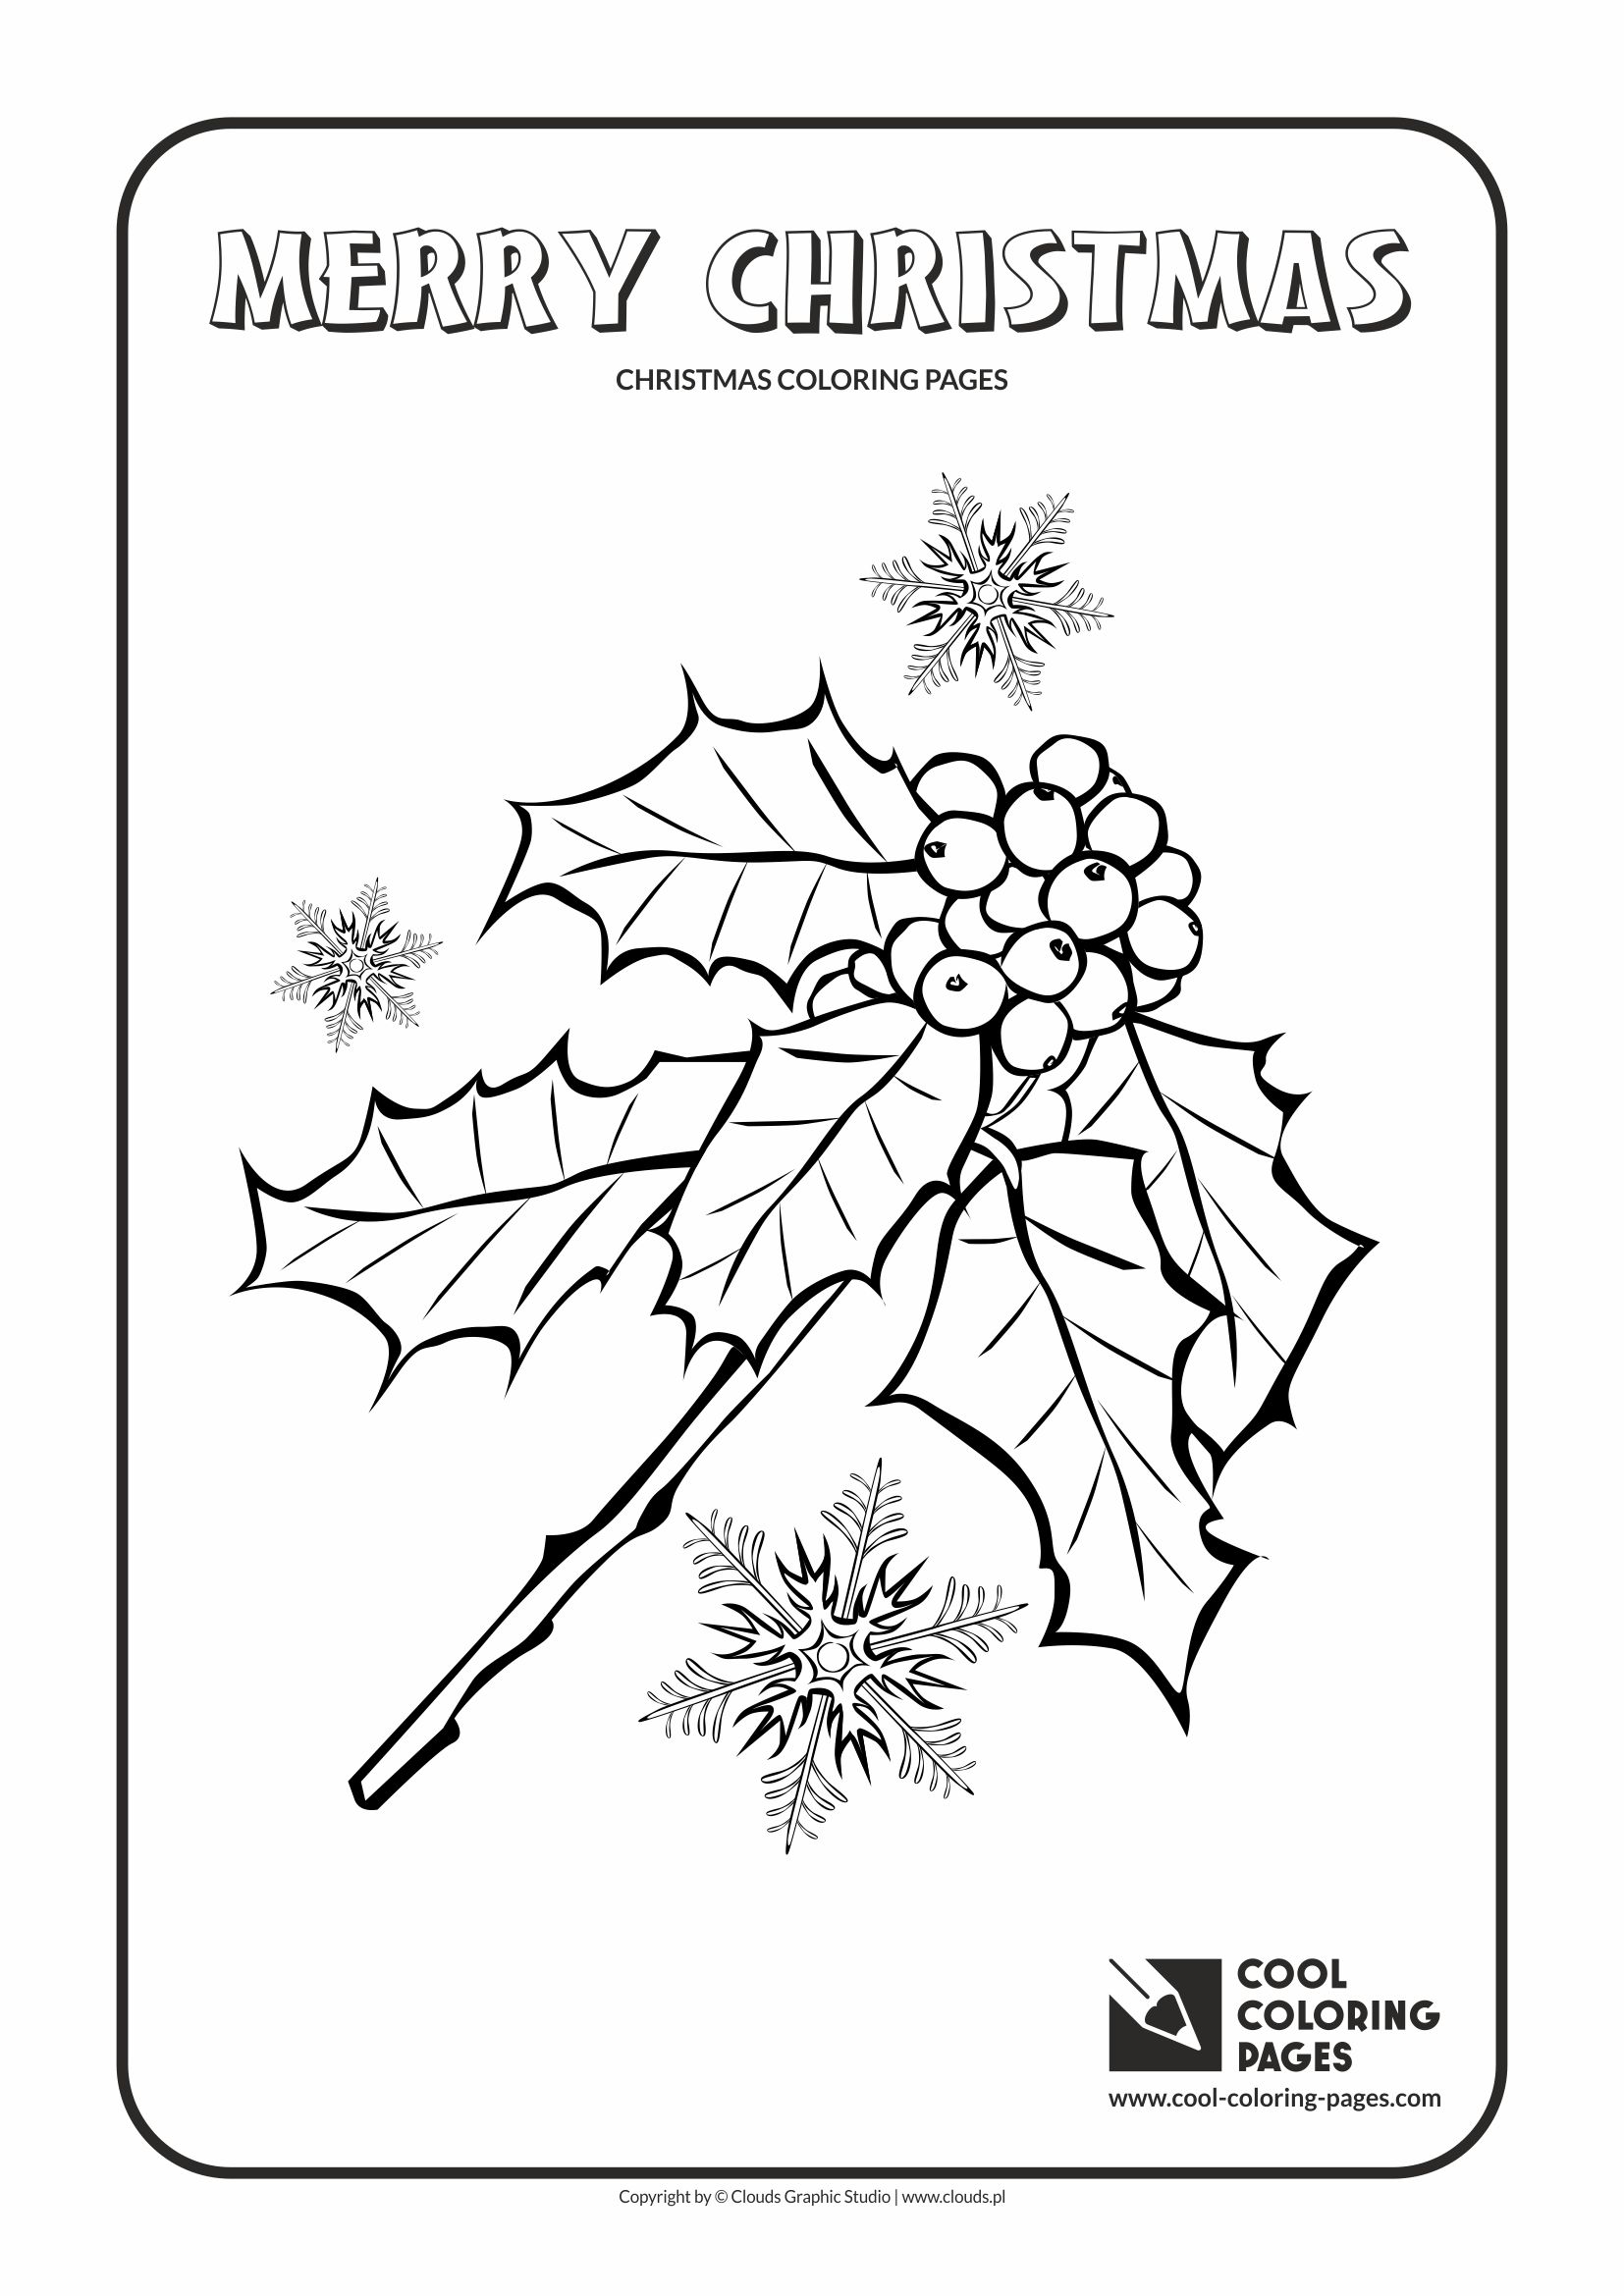 Cool Coloring Pages Holly Berries coloring page - Cool Coloring Pages |  Free educational coloring pages and activities for kids